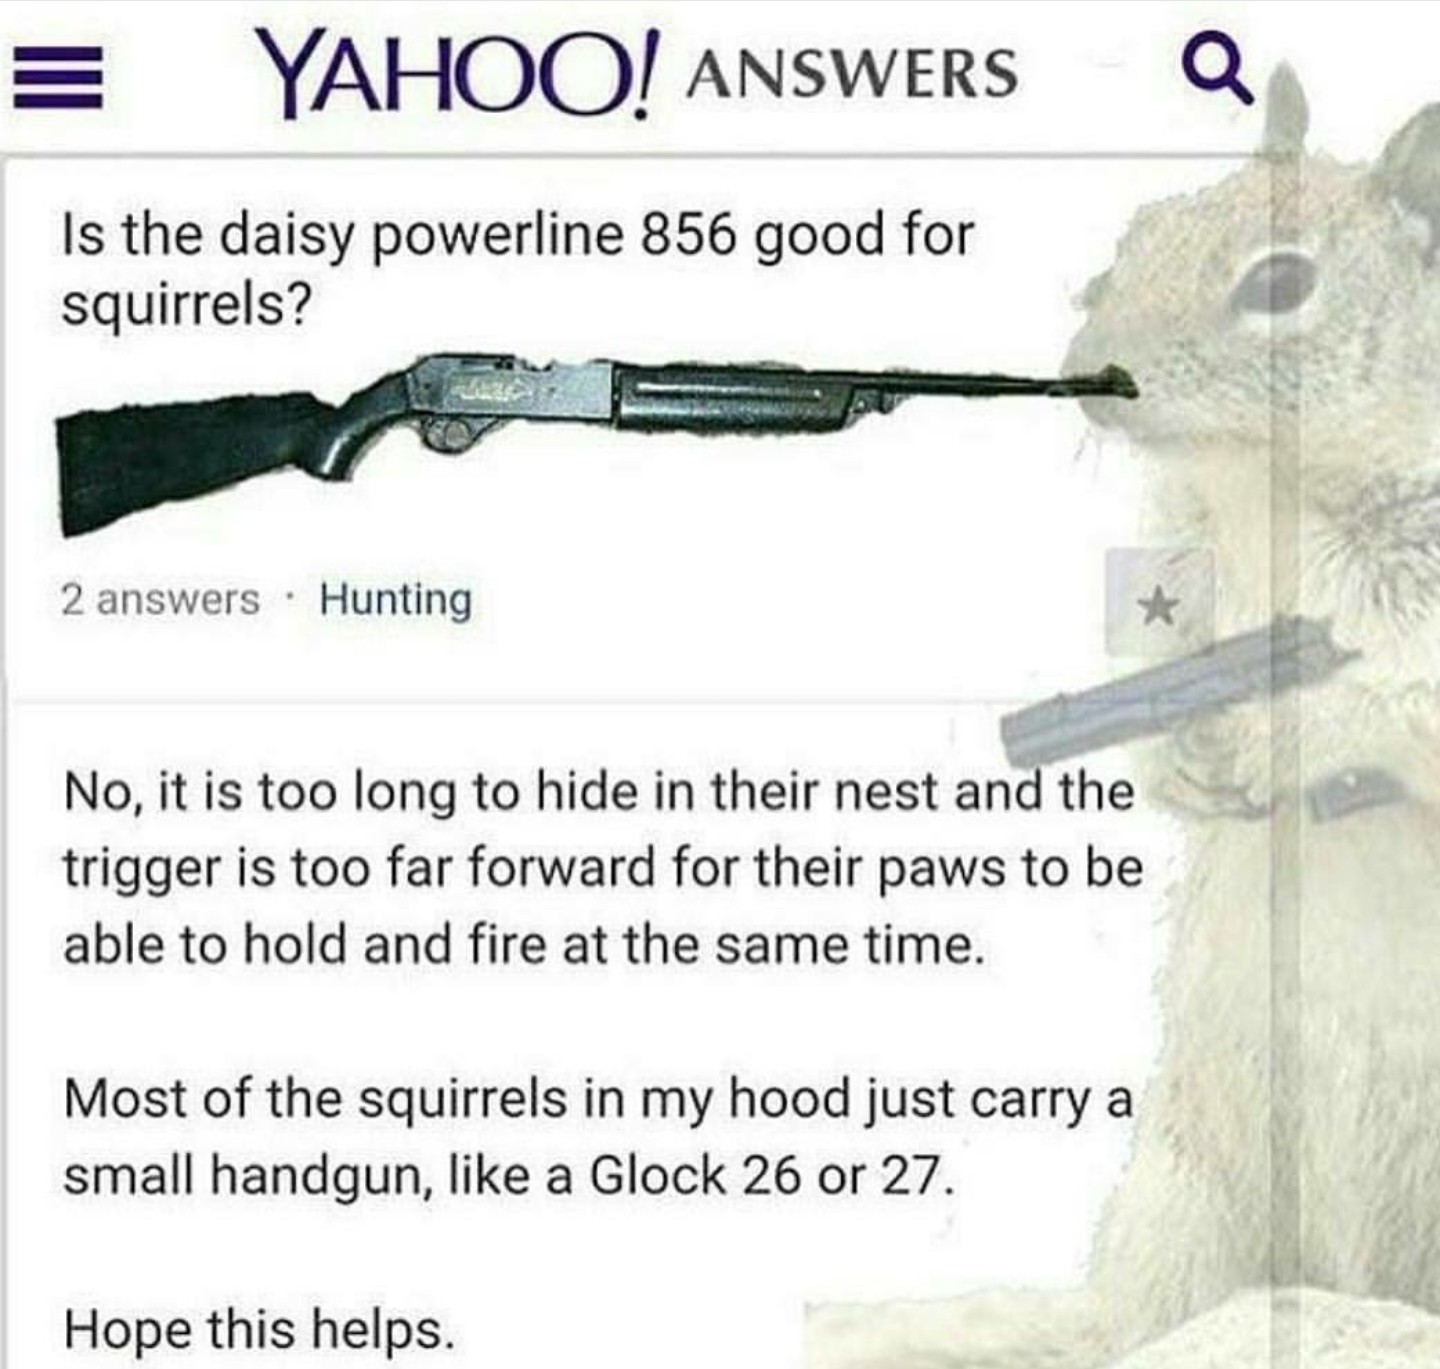 Someone asks on yahoo answers if a Daisy Powerline 856 is good for squirrels and epic troll responds as to which kind of firearms the furry creatures prefer to wield.